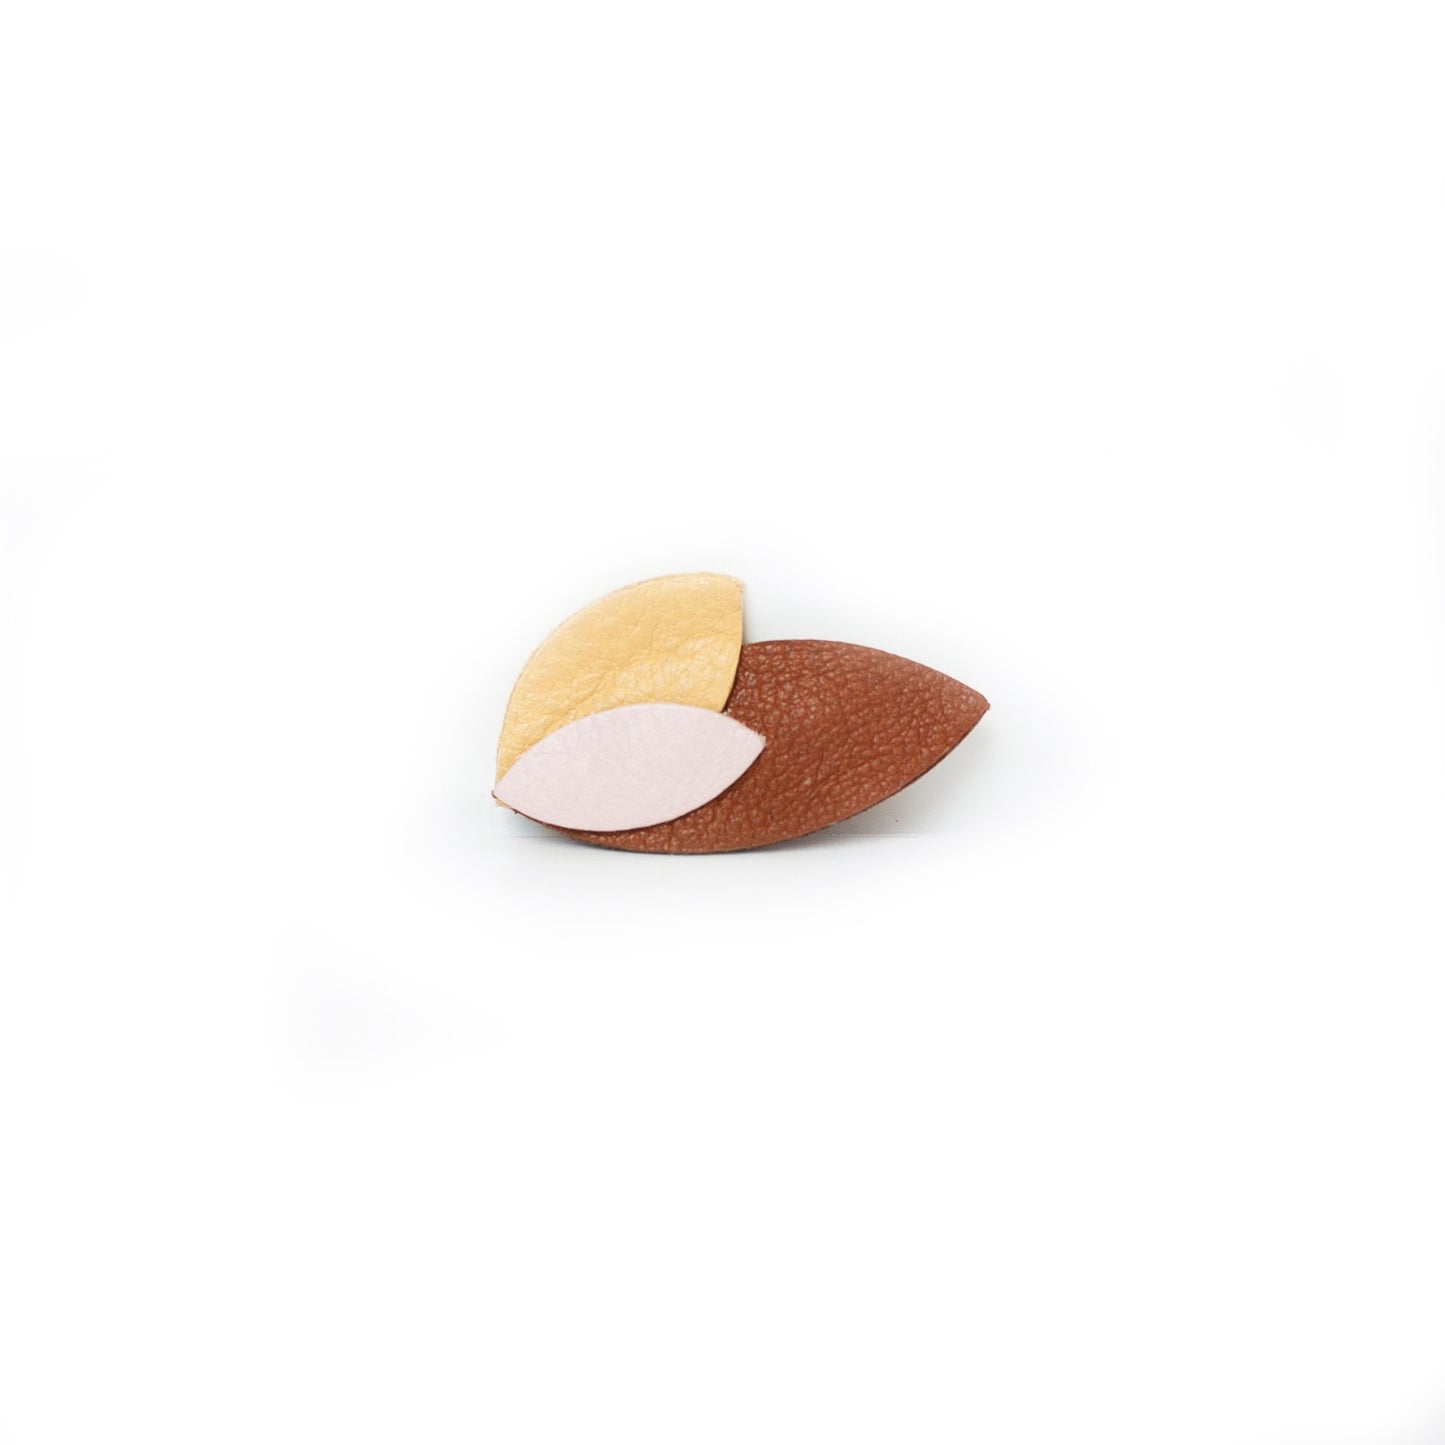 Leaf brooch in pink, beige and brown leather